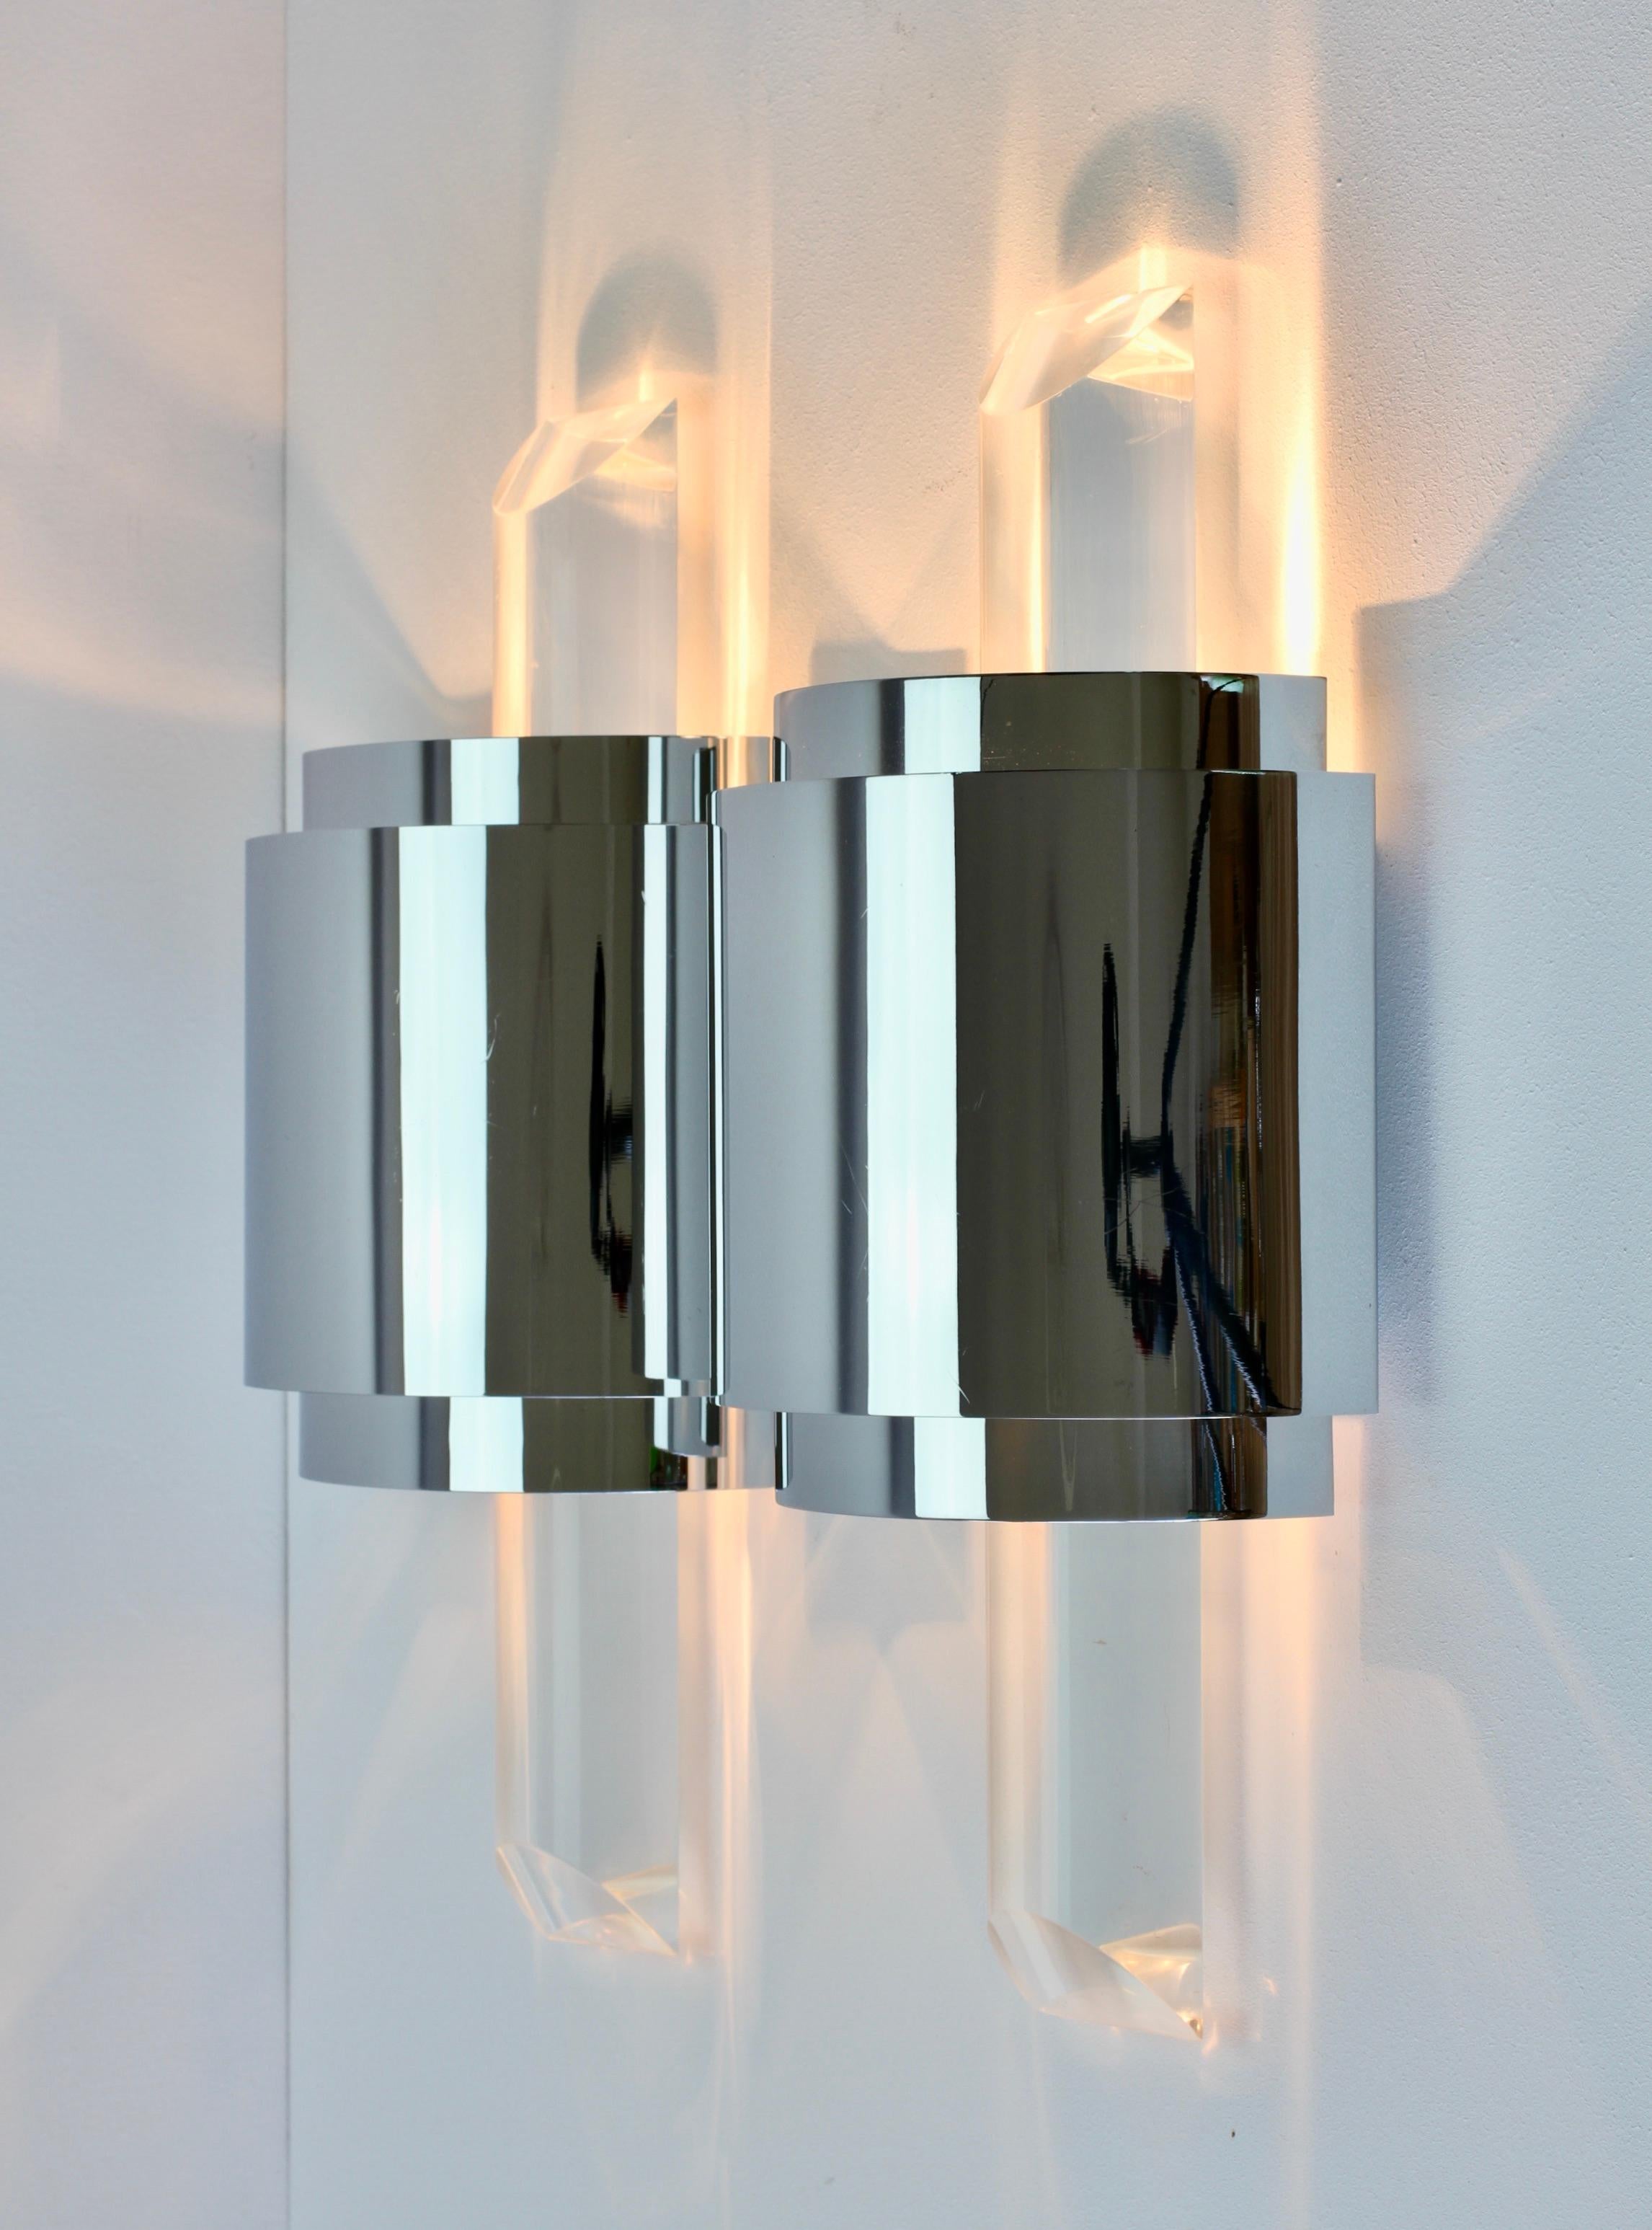 Large Hollywood Regency Lucite and Chrome Wall Lights or Sconces, circa 1970s For Sale 5